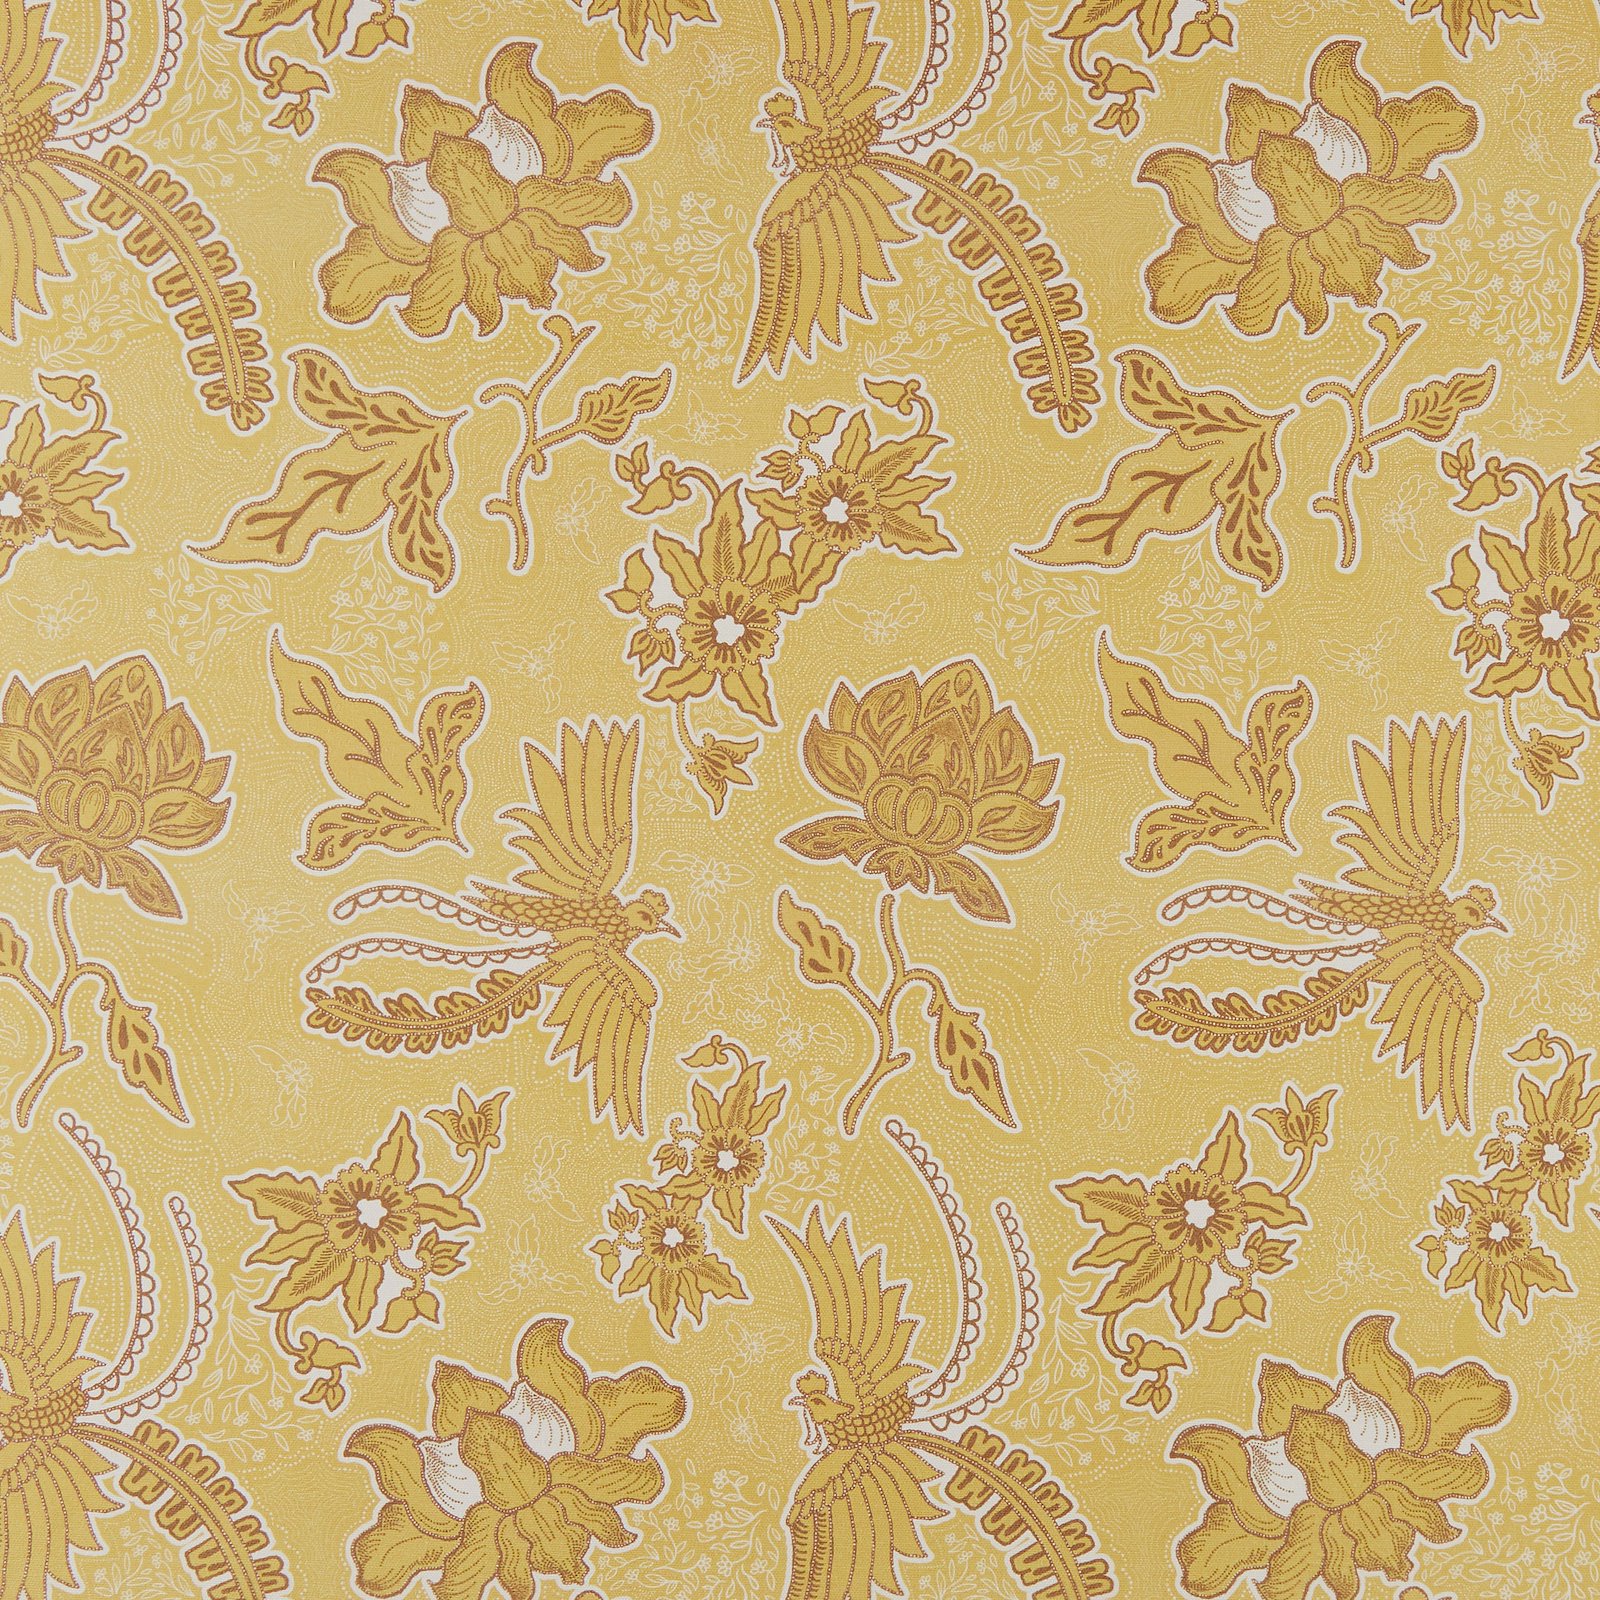 Upholstery panama yellow cranes/flowers 826512_pack_solid